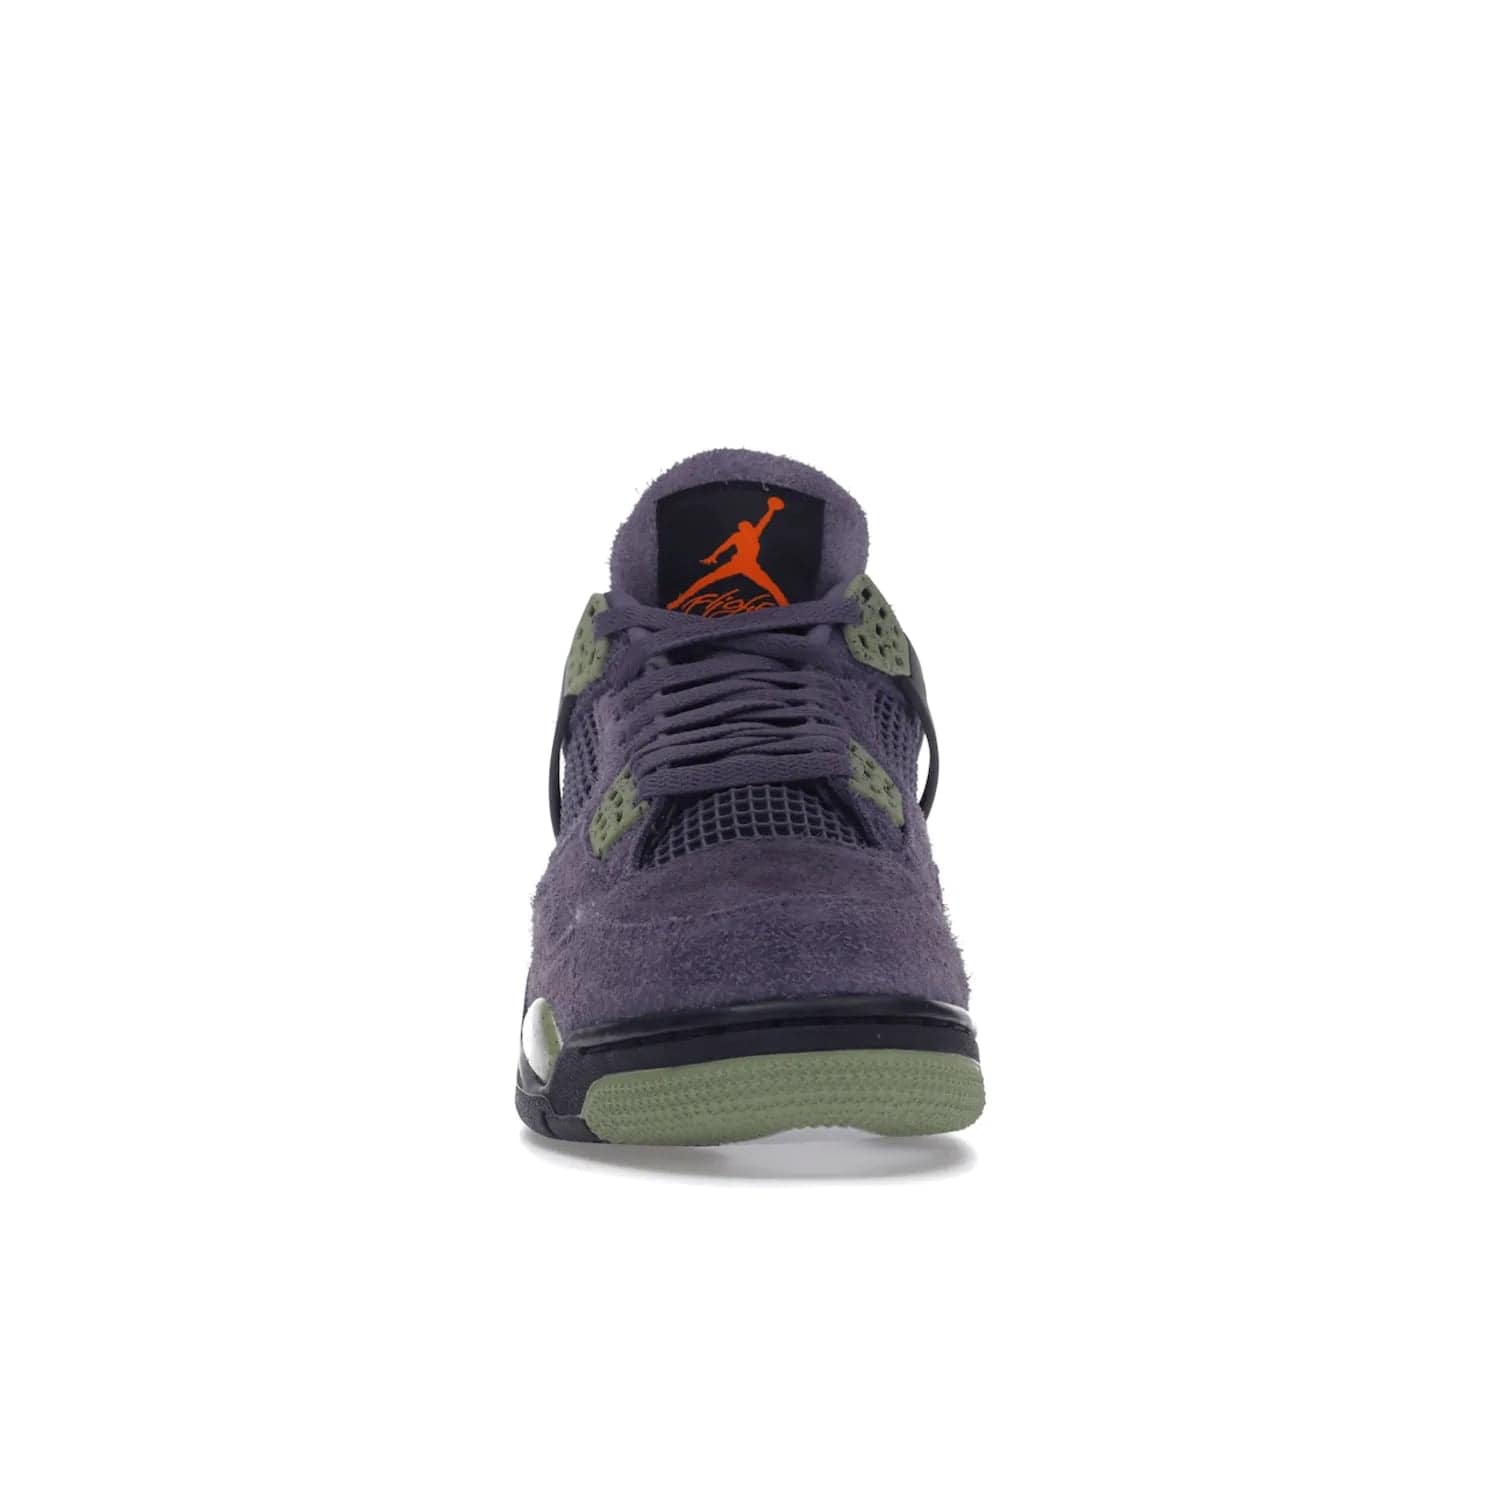 Jordan 4 Retro Canyon Purple (Women's) - Image 10 - Only at www.BallersClubKickz.com - New Air Jordan 4 Retro Canyon Purple W sneaker features shaggy purple suede, lime highlights & safety orange Jumpman branding. Classic ankle-hugging silhouette with modern colors released 15/10/2022.